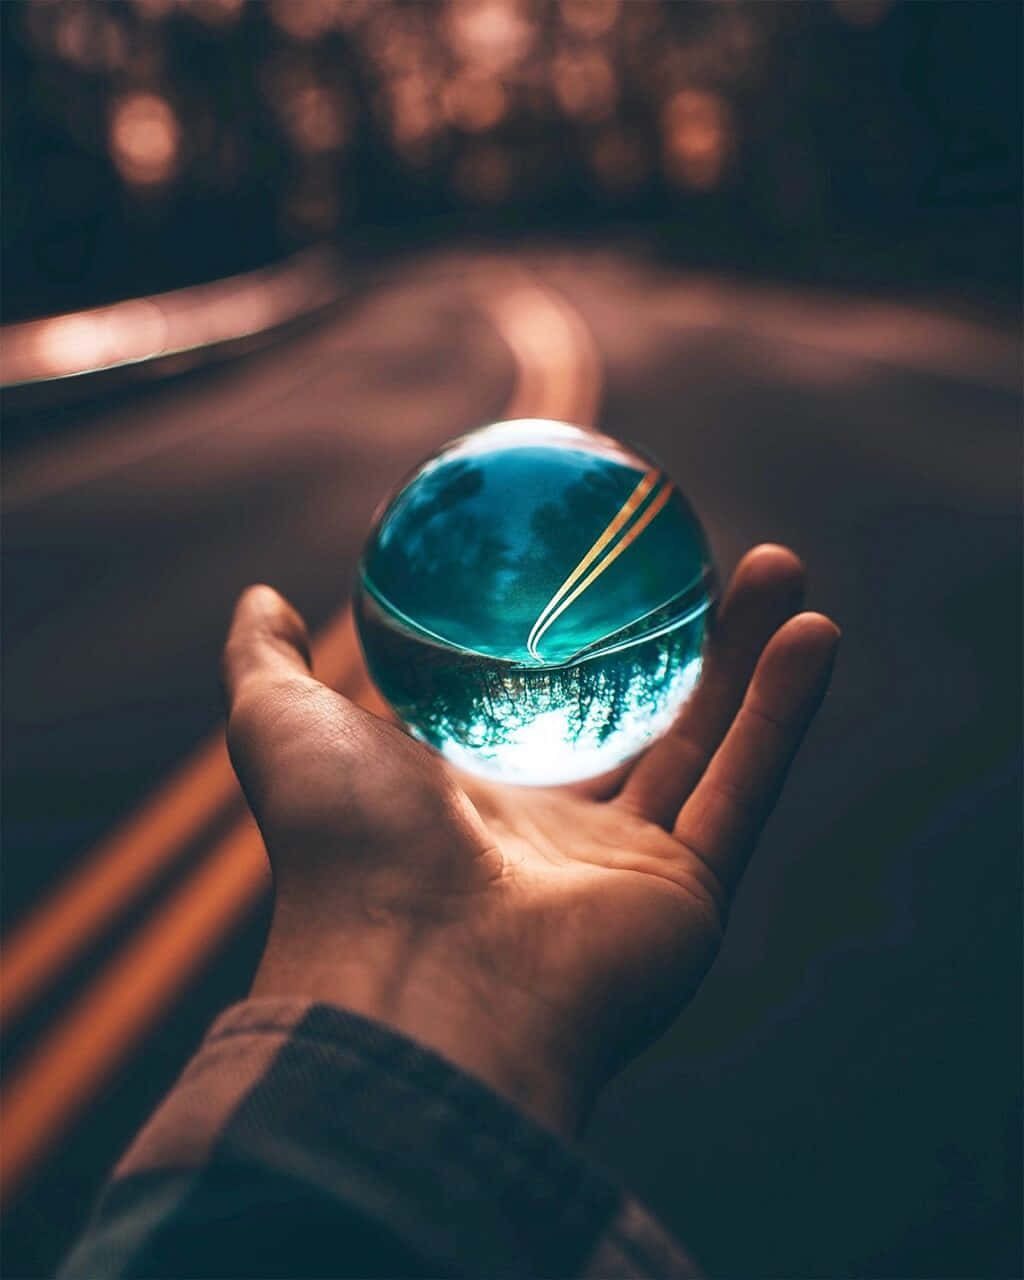 A Person Holding A Glass Ball On A Road